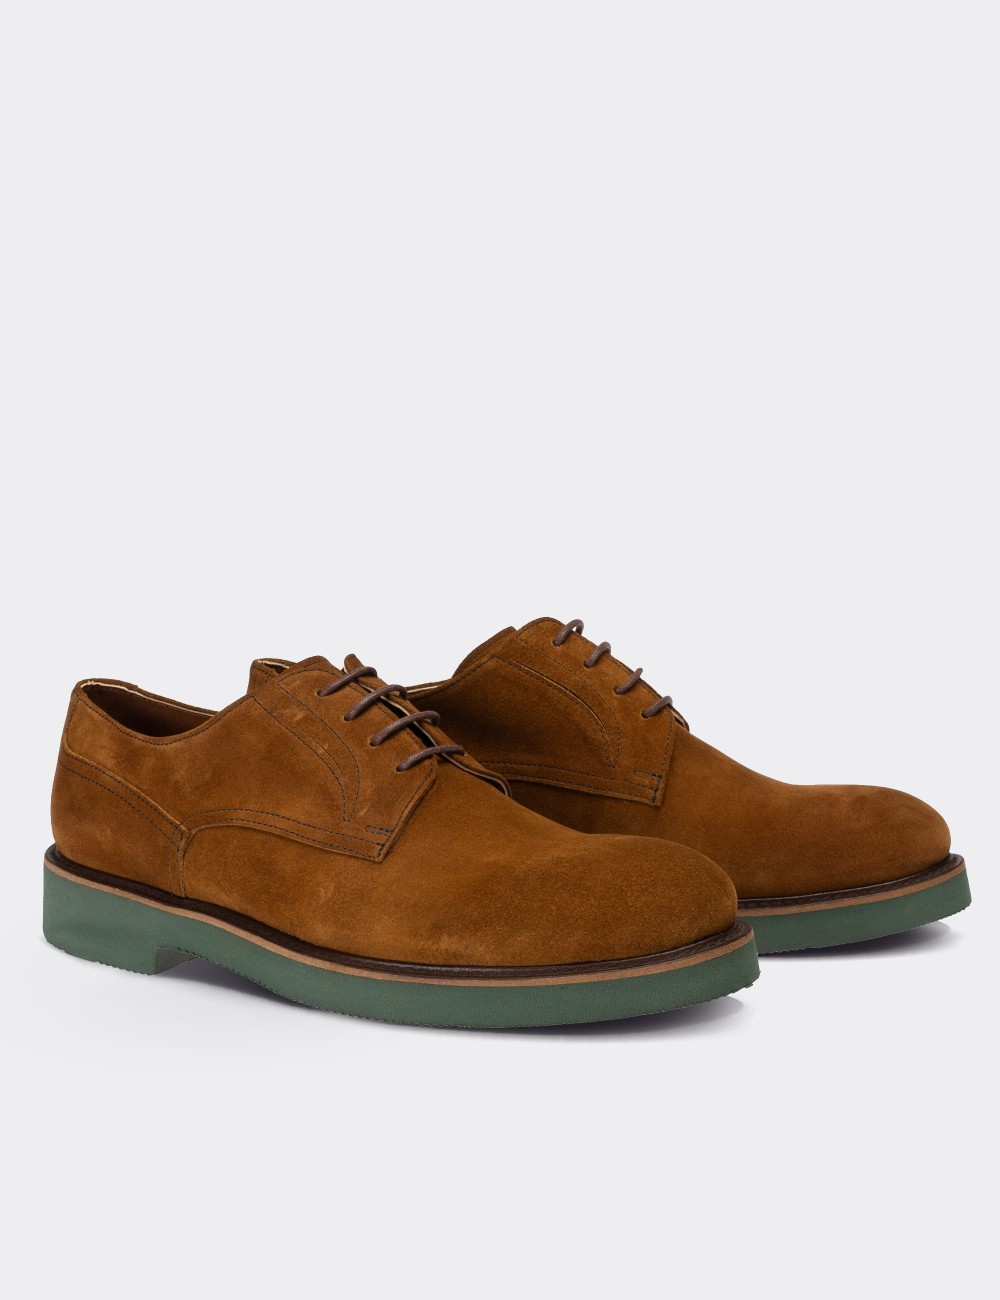 Tan Suede Leather Lace-up Shoes - 01294MTBAE12